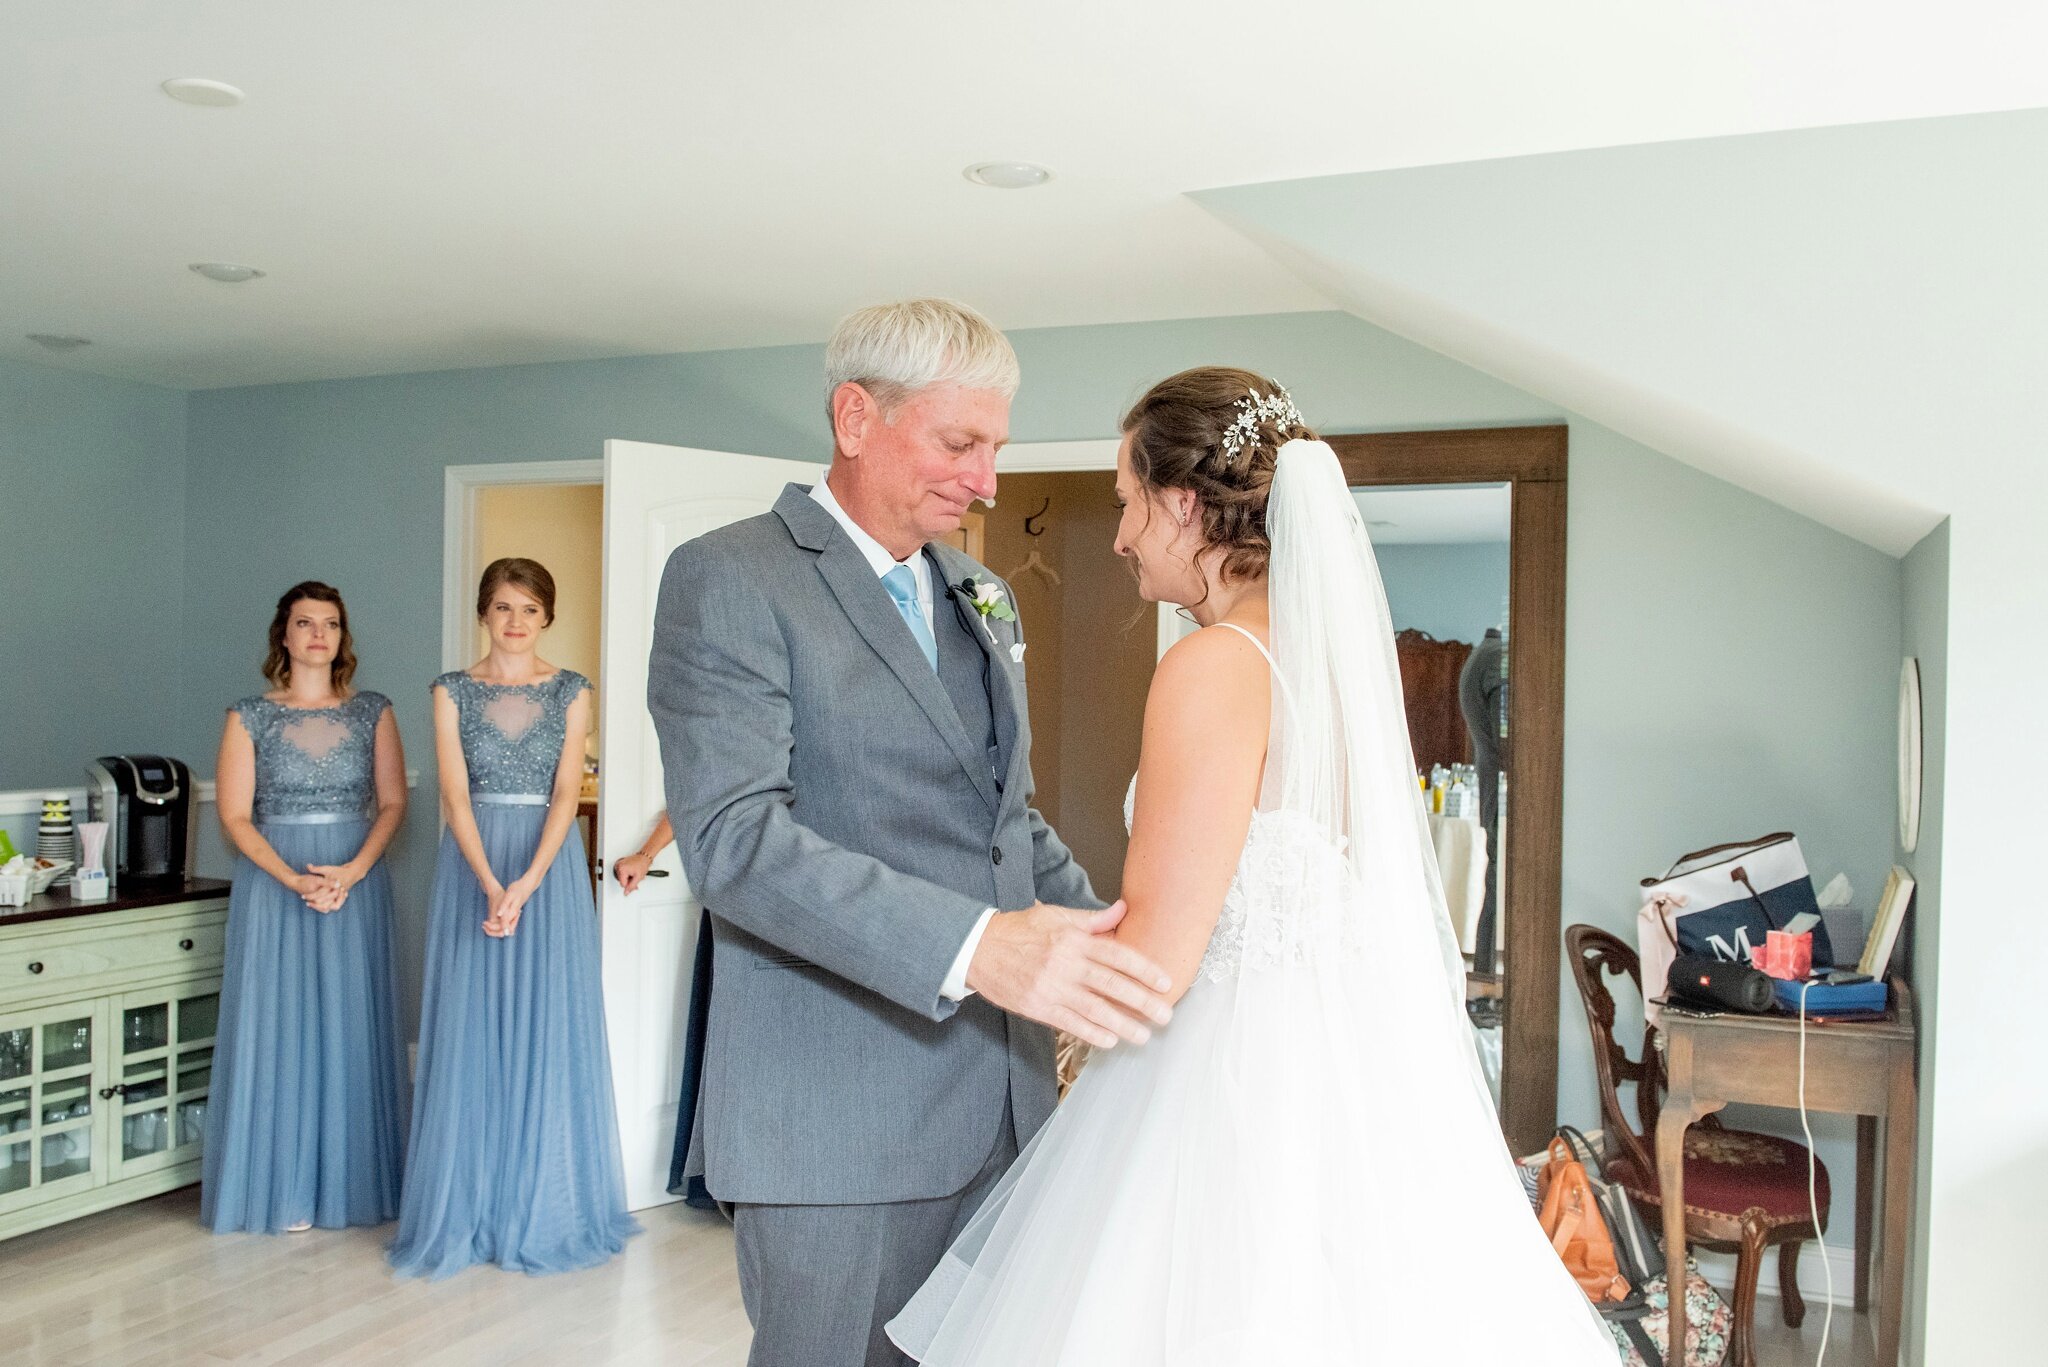 Father daughter first look wedding photo